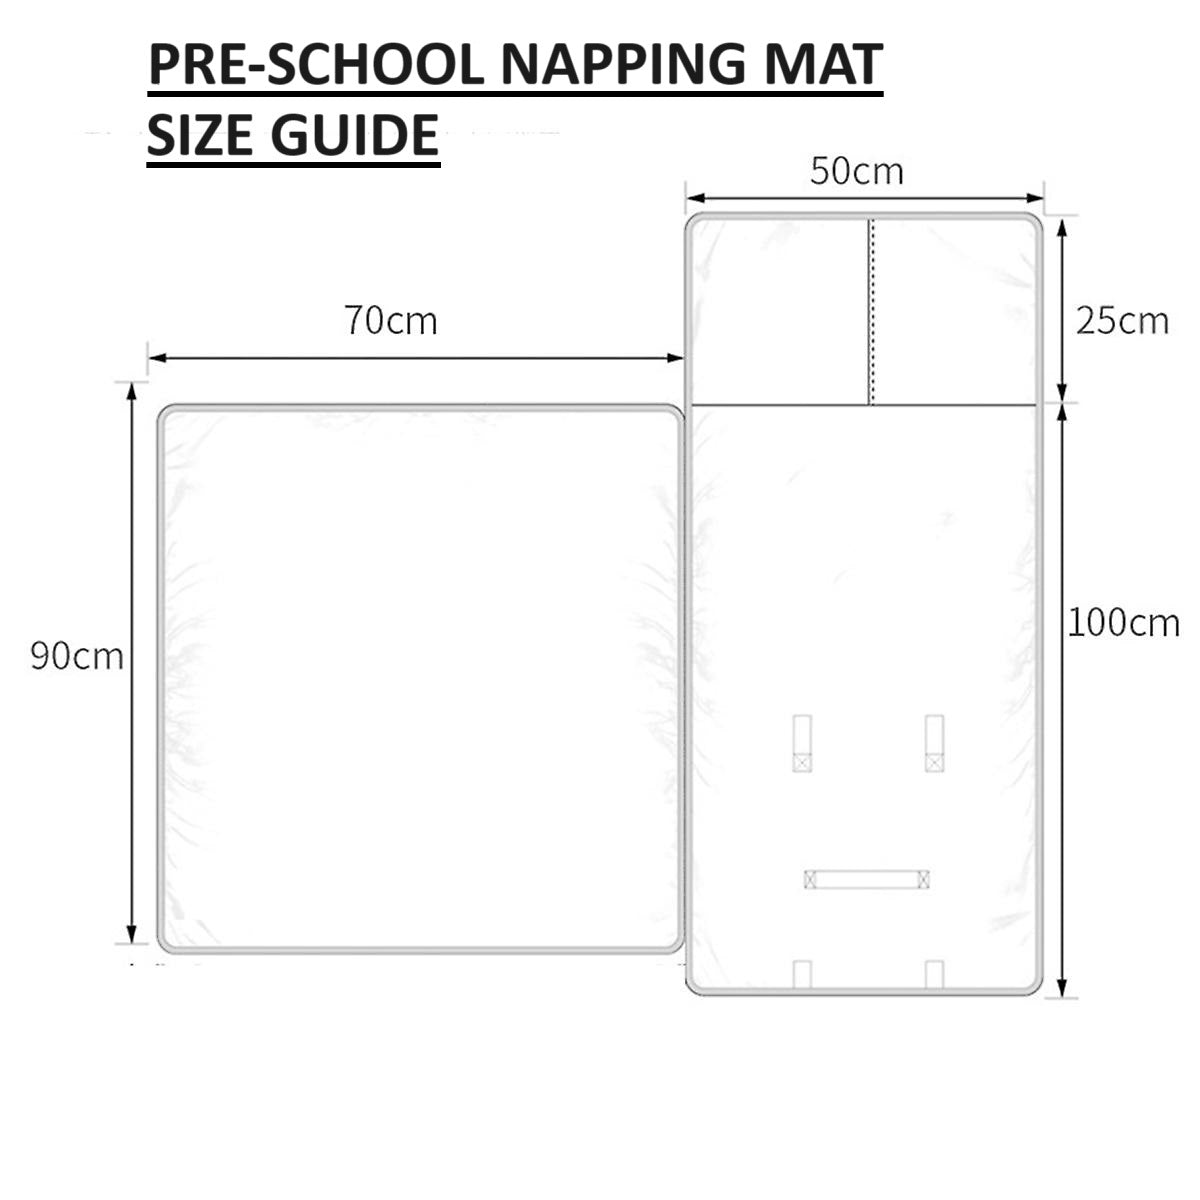 !!! PRE-ORDER !!! Pre-School Napping Mat - Ages 2 - 6 Years